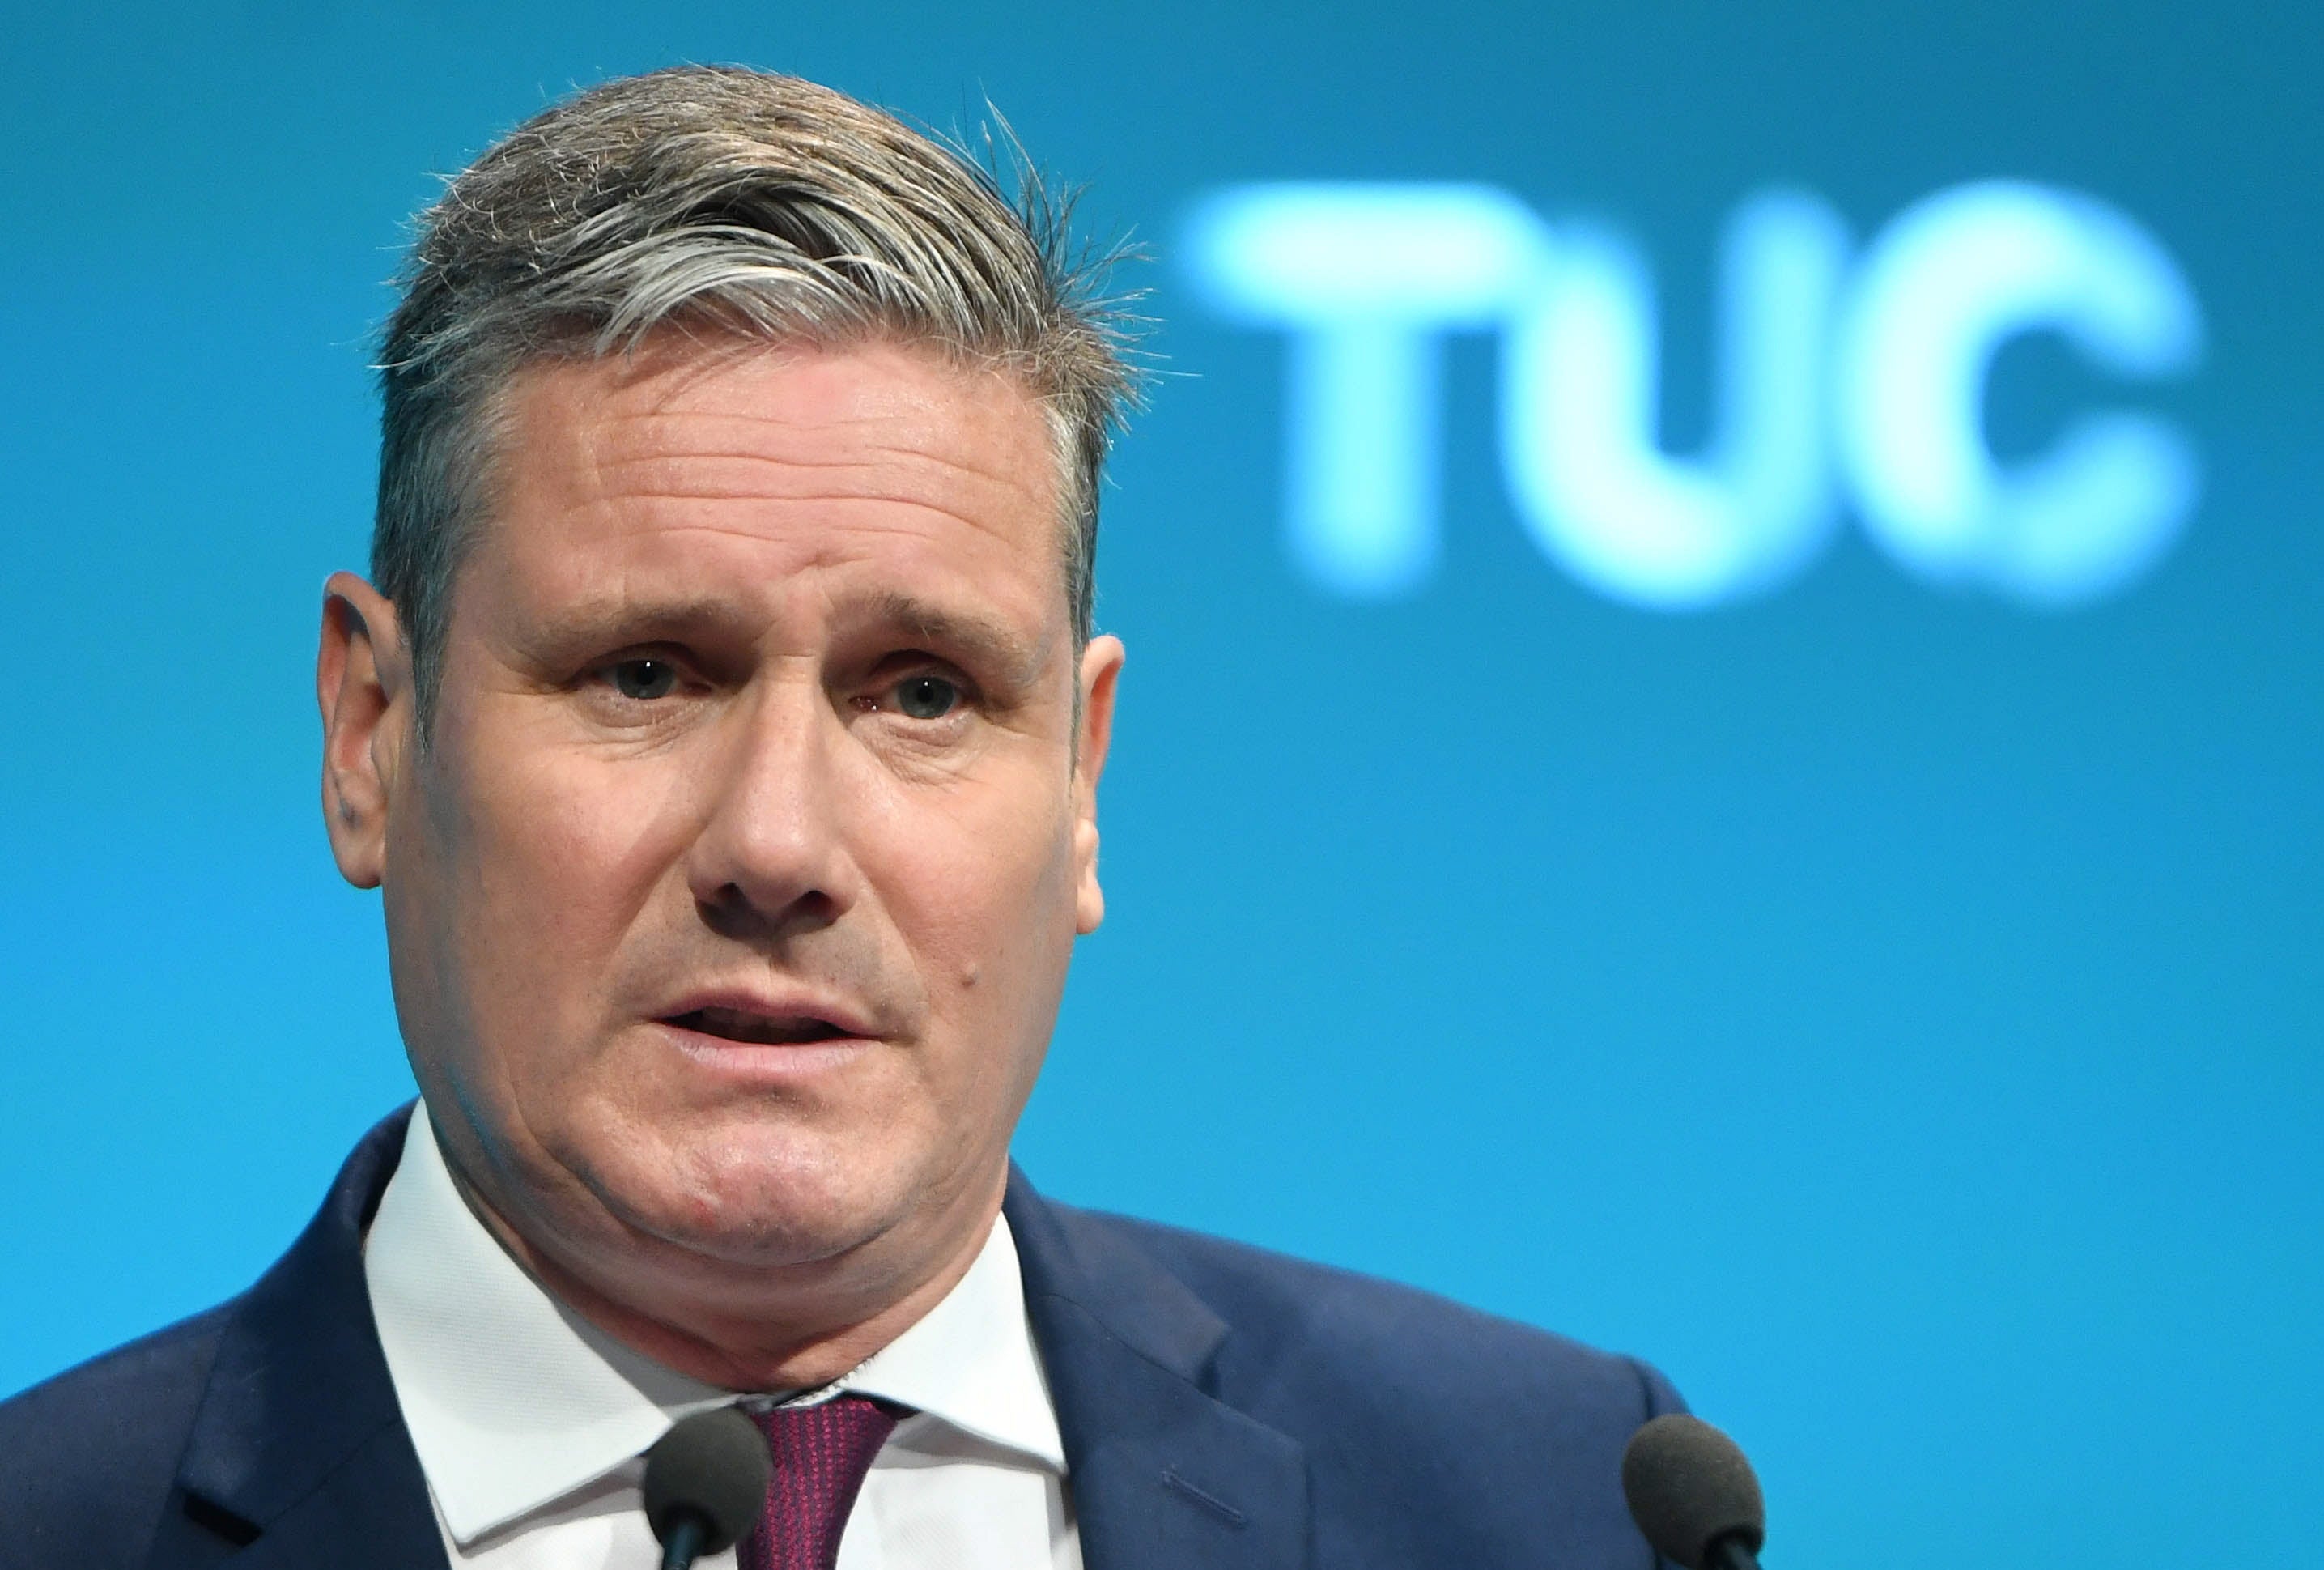 Sir Keir Starmer delivers his speech virtually at the TUC conference